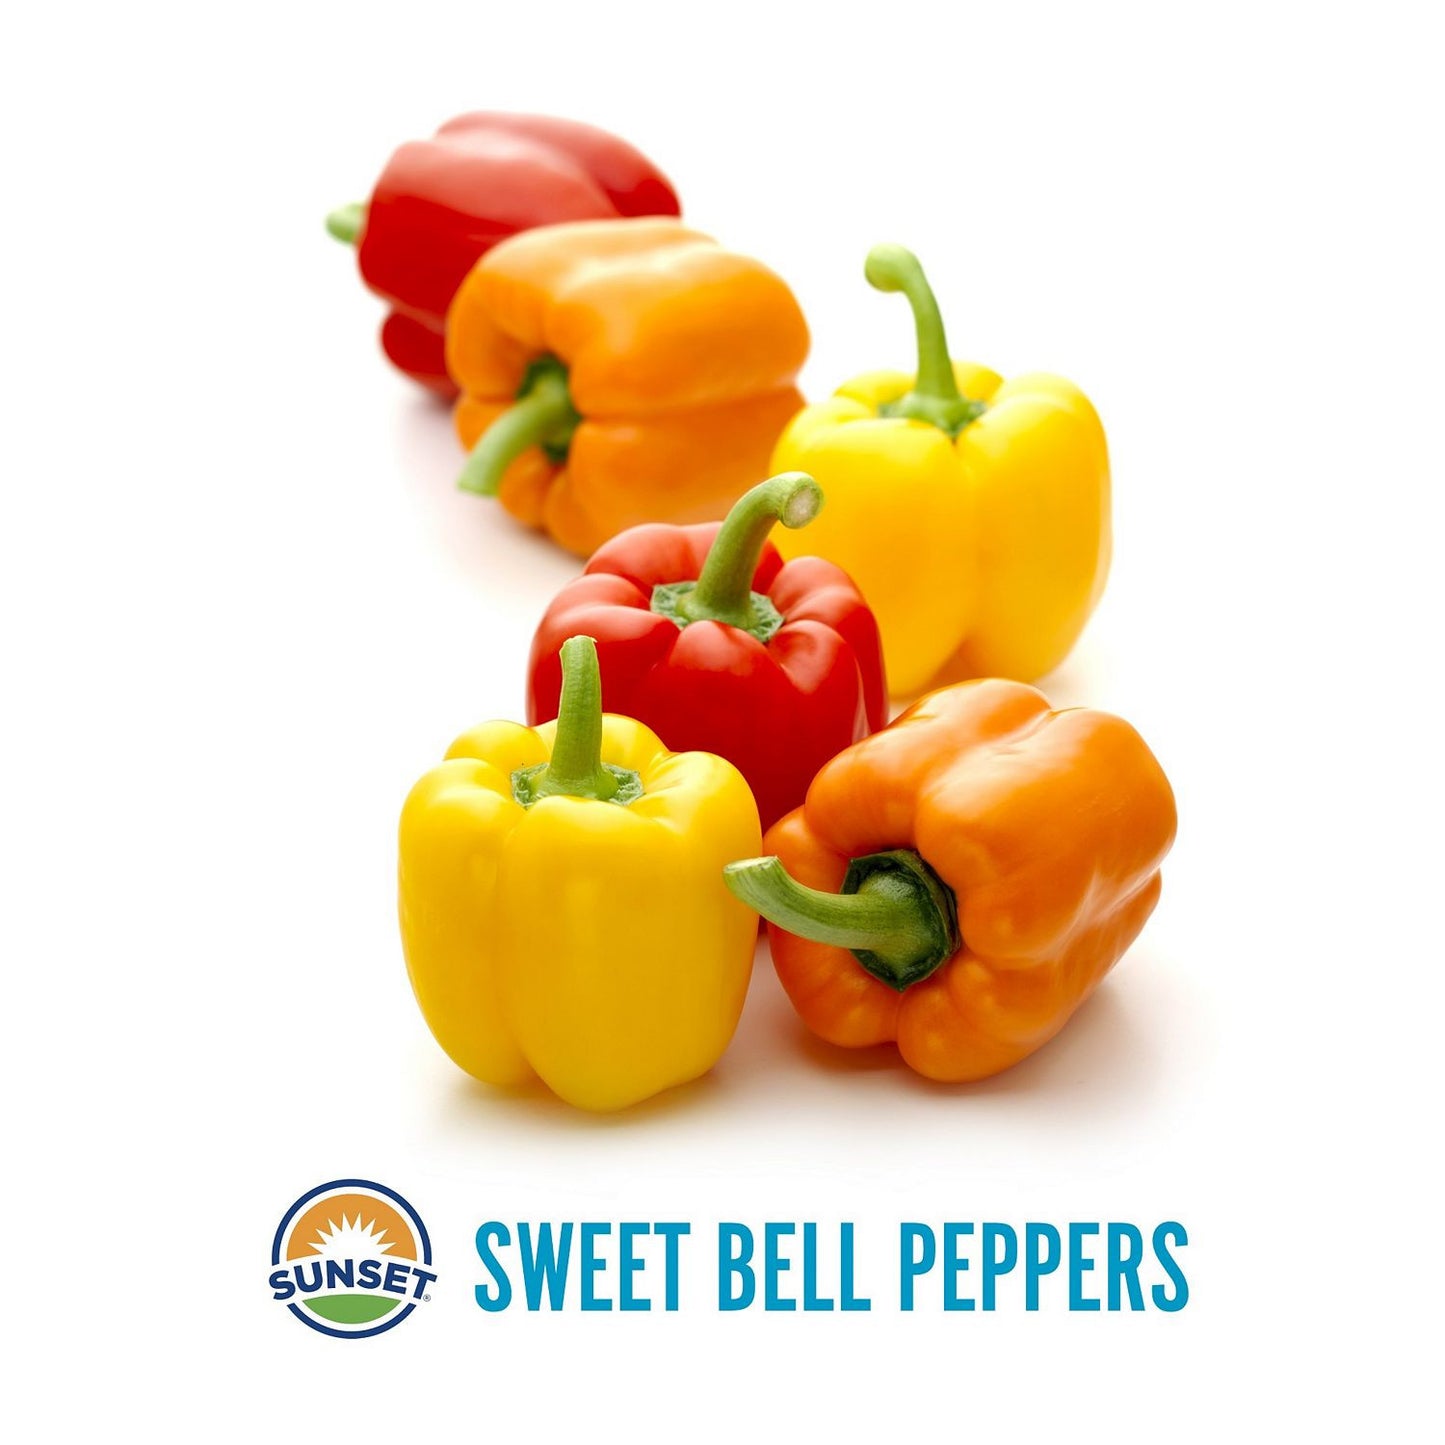 Multi Bell Sweet Peppers (6 ct.)